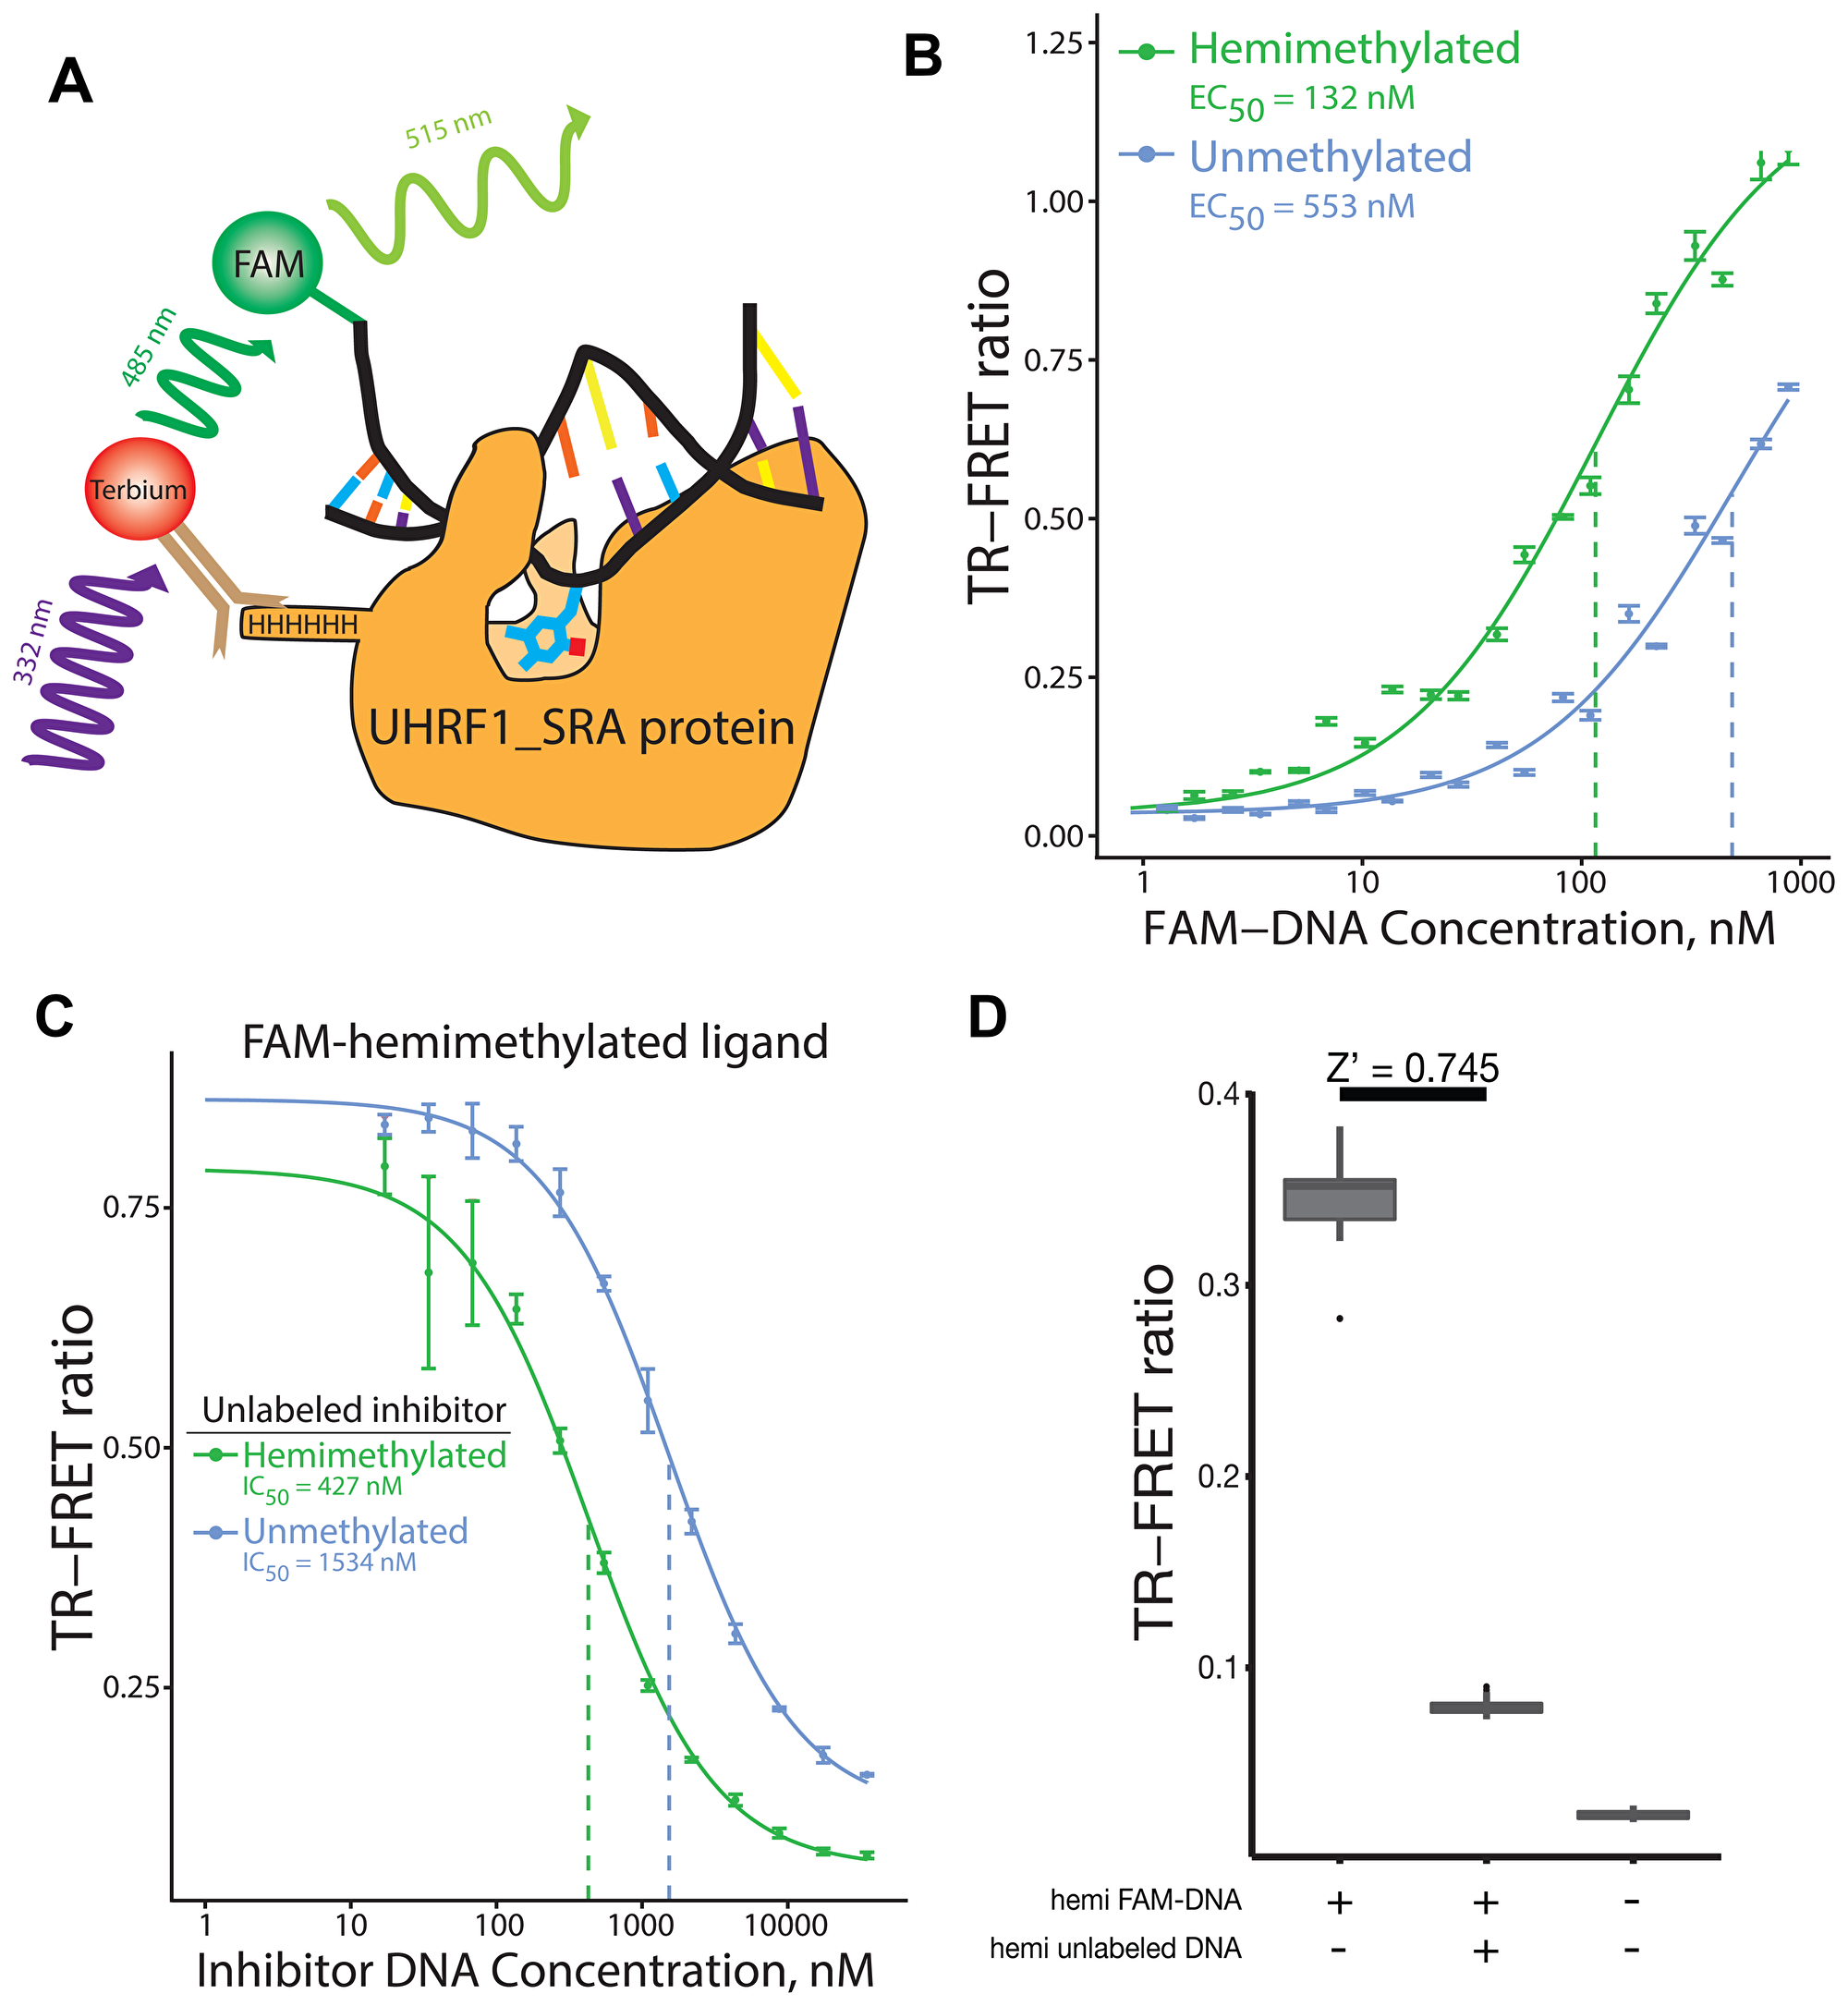 Overview, validation, and evaluation of performance of TR-FRET UHRF1_SRA DNA binding assay.